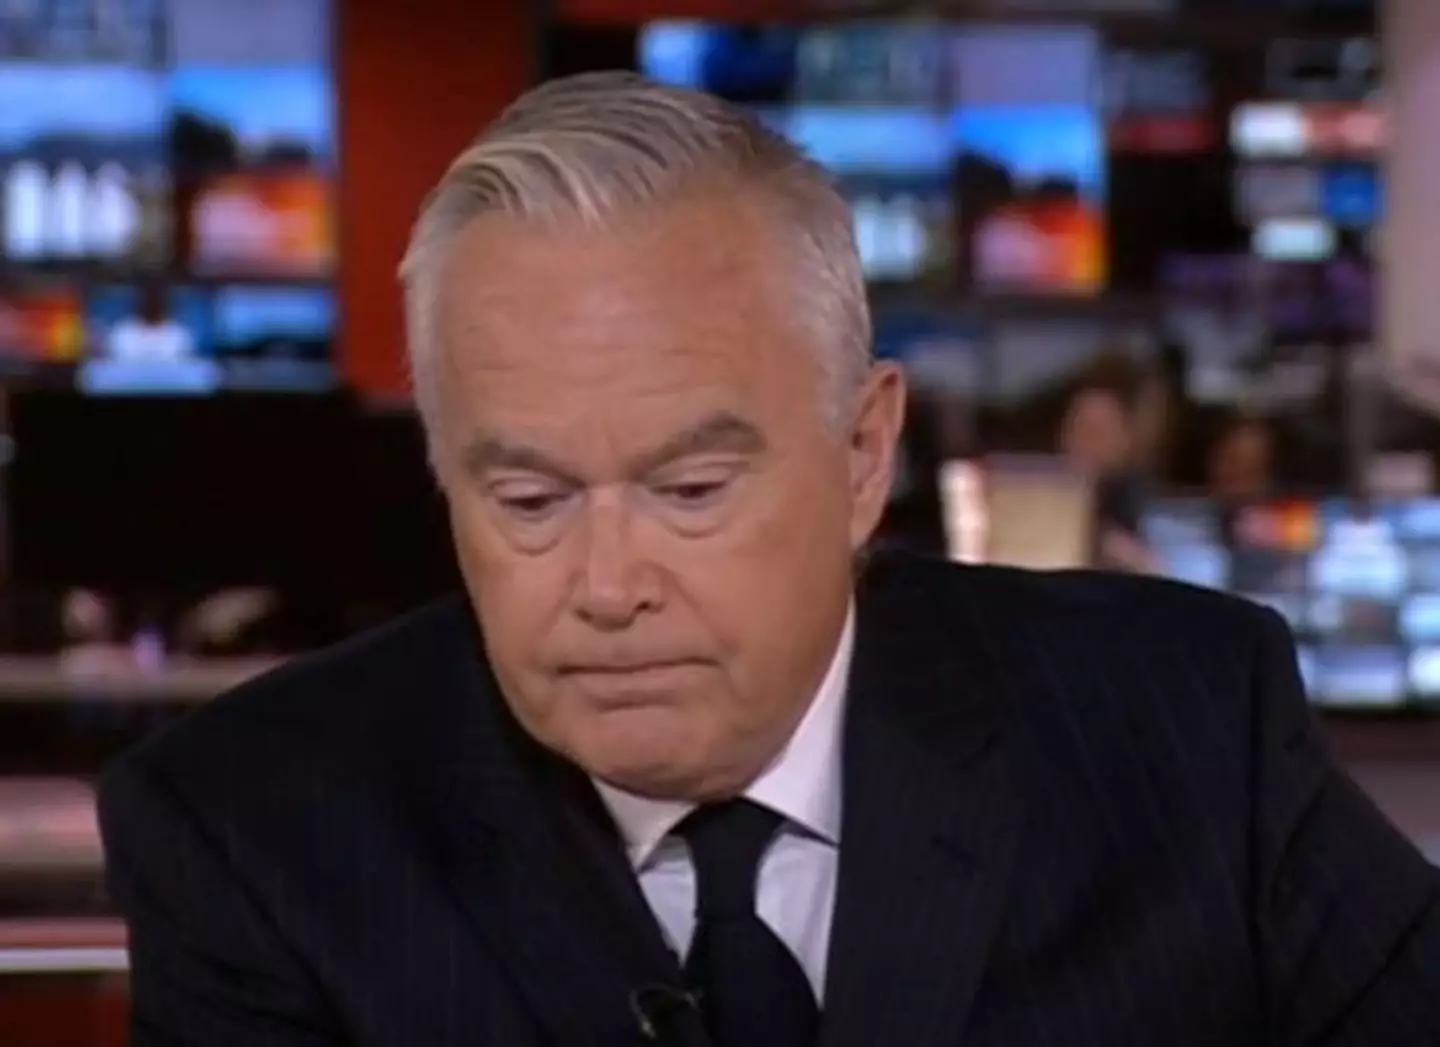 Huw Edwards was visibly moved by the news.